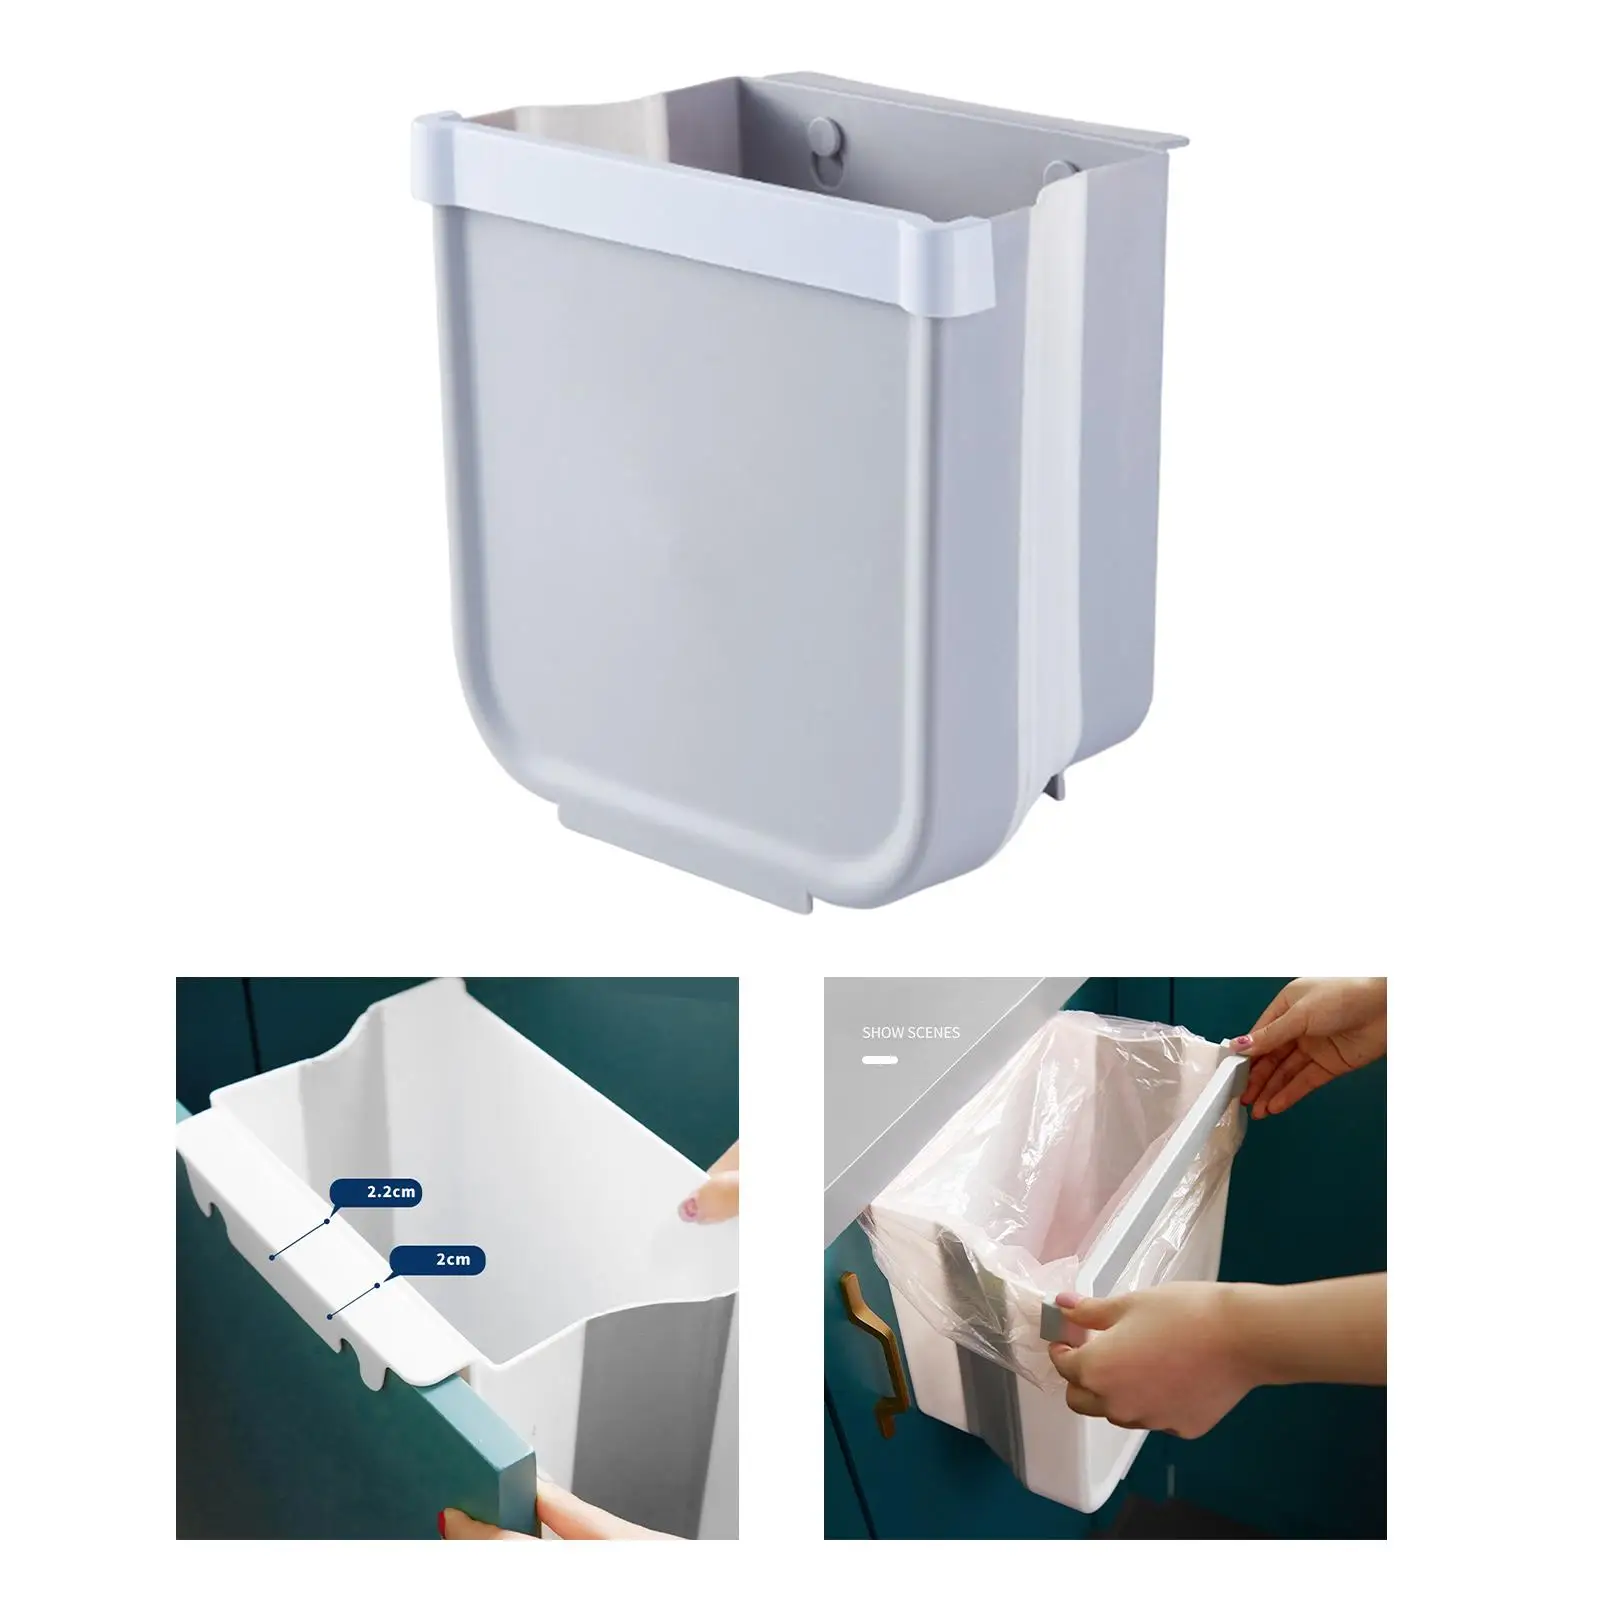 Kitchen Wall Mounted Trash Can Small Hanging Rectangular Garbage Bin Dustbin for Kitchen Cabinet Cupboard Wall Bathroom Laundry